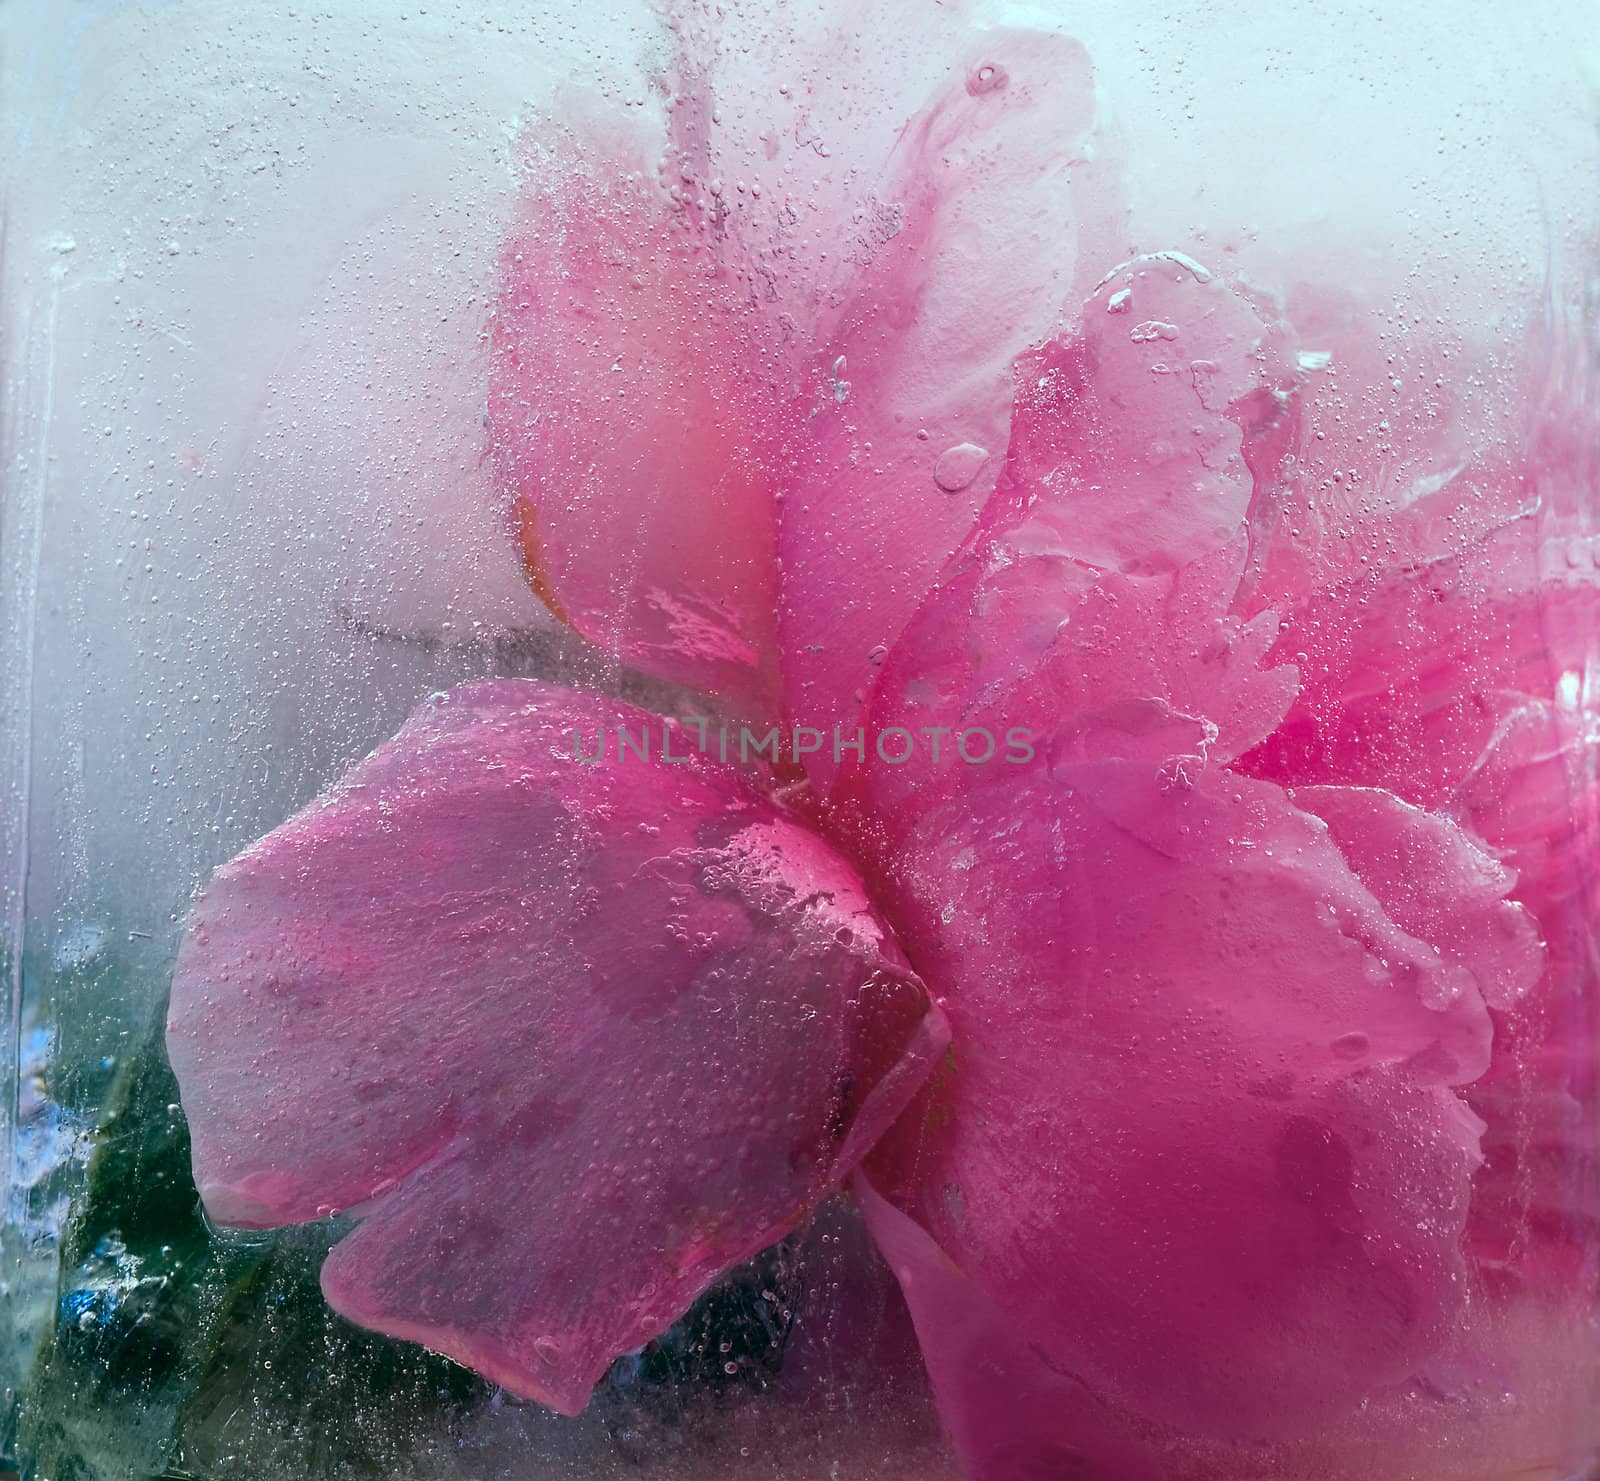  Frozen   pink peony flower  by foryouinf